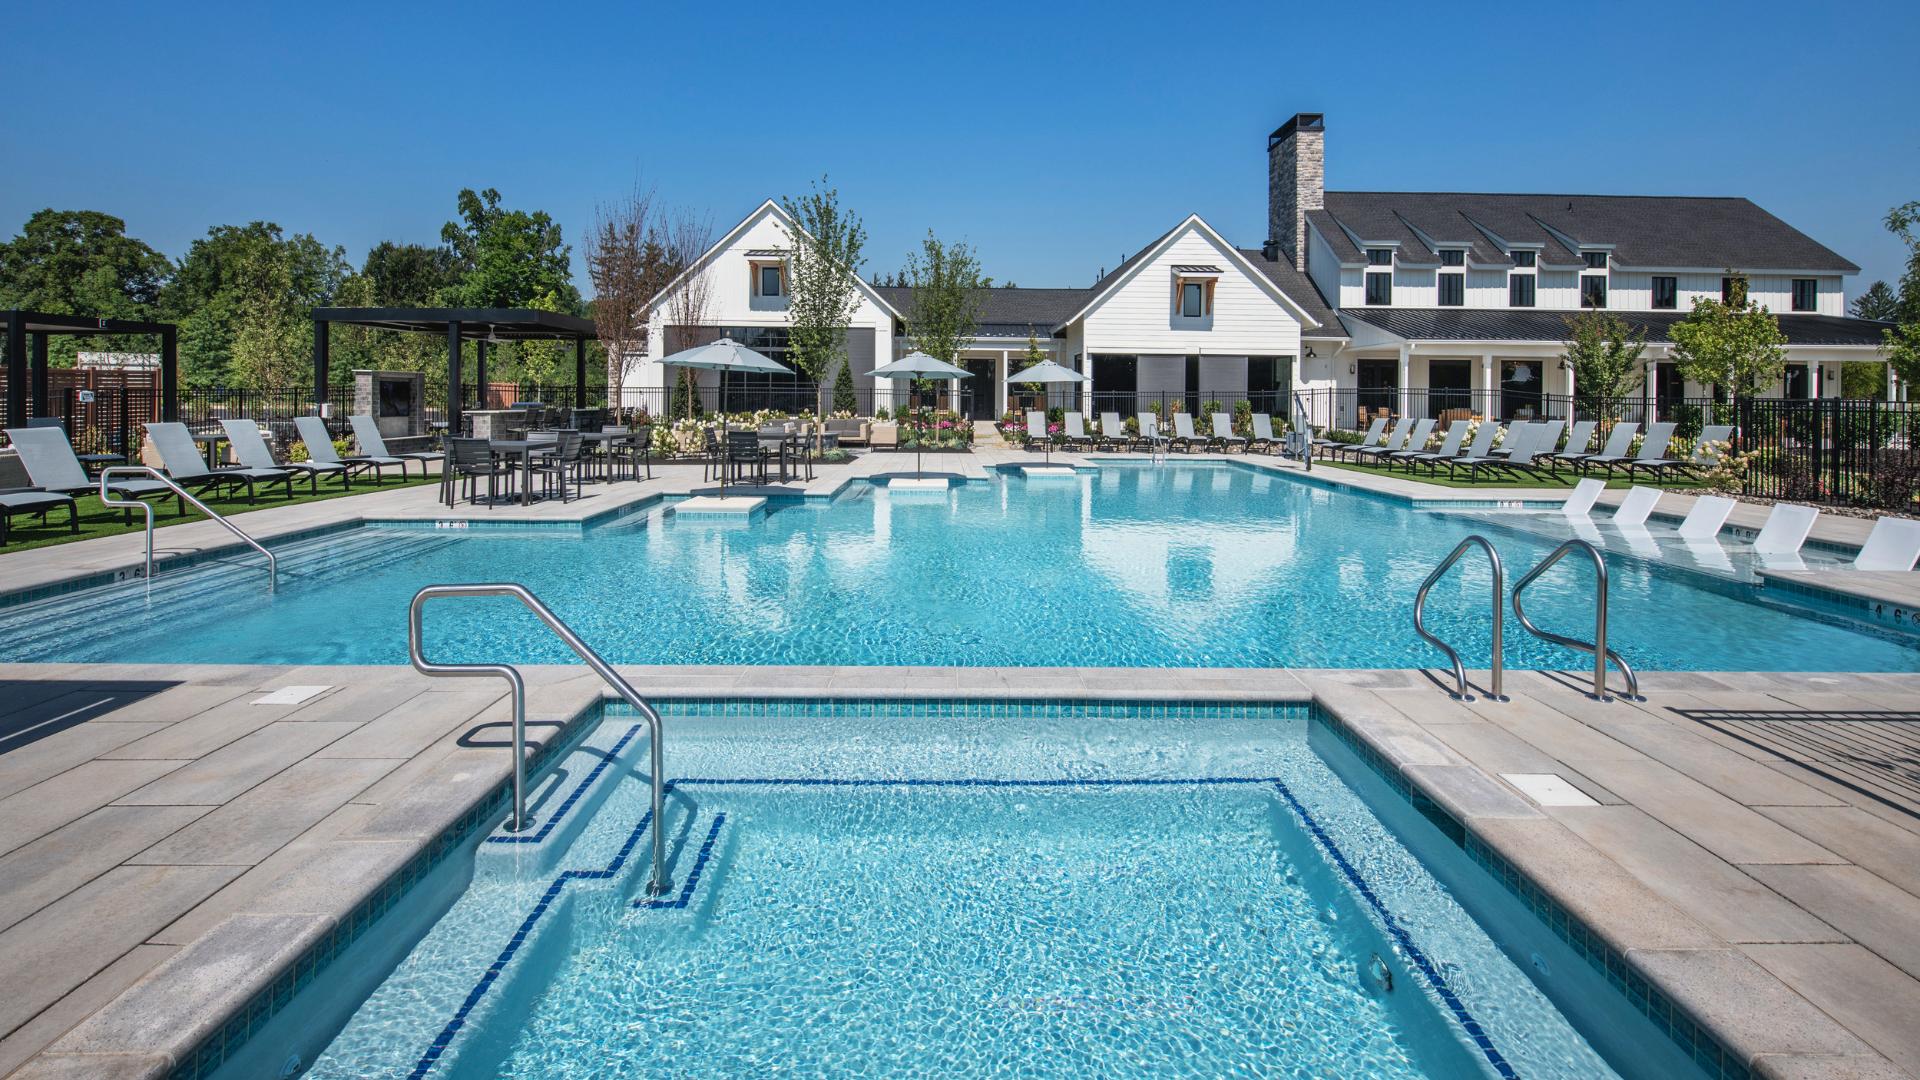 Outdoor pool at the clubhouse